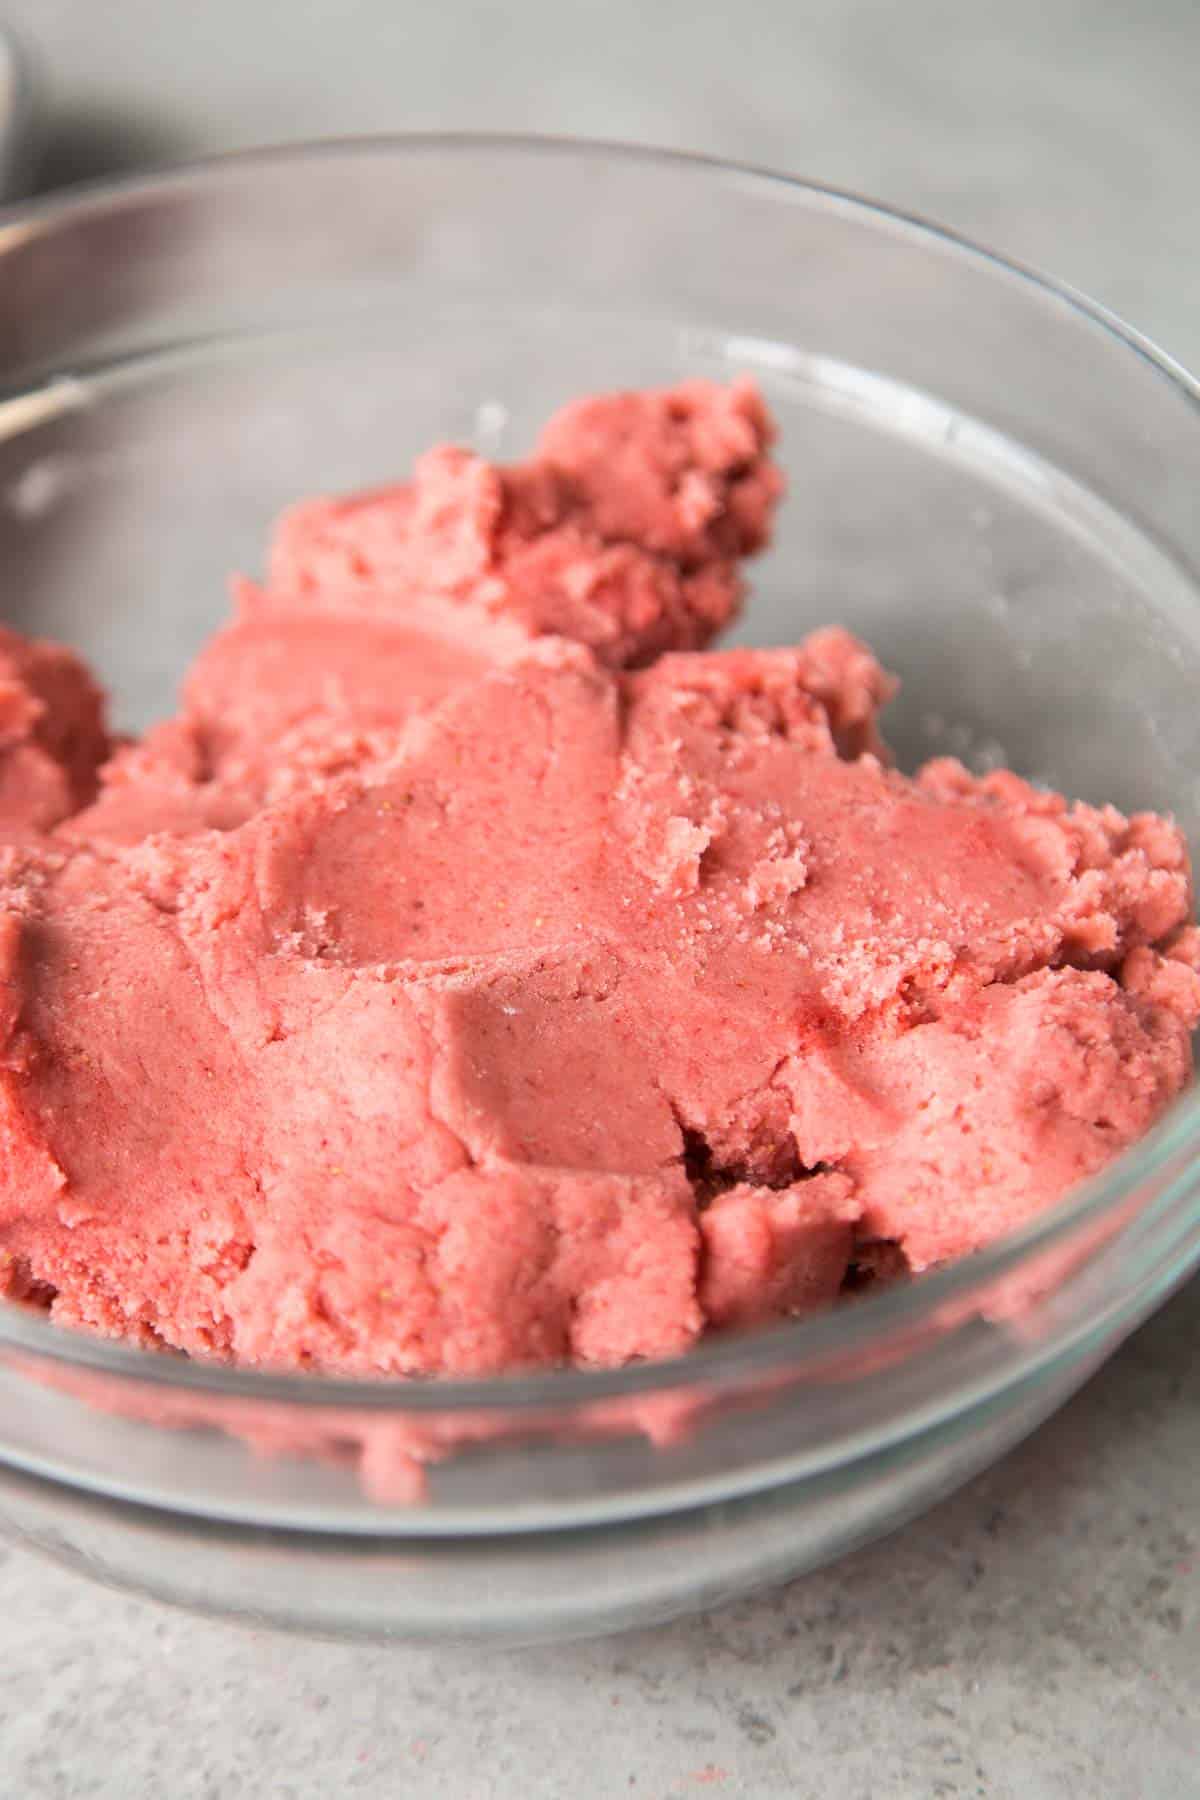 naturally colored strawberry sugar cookie dough.